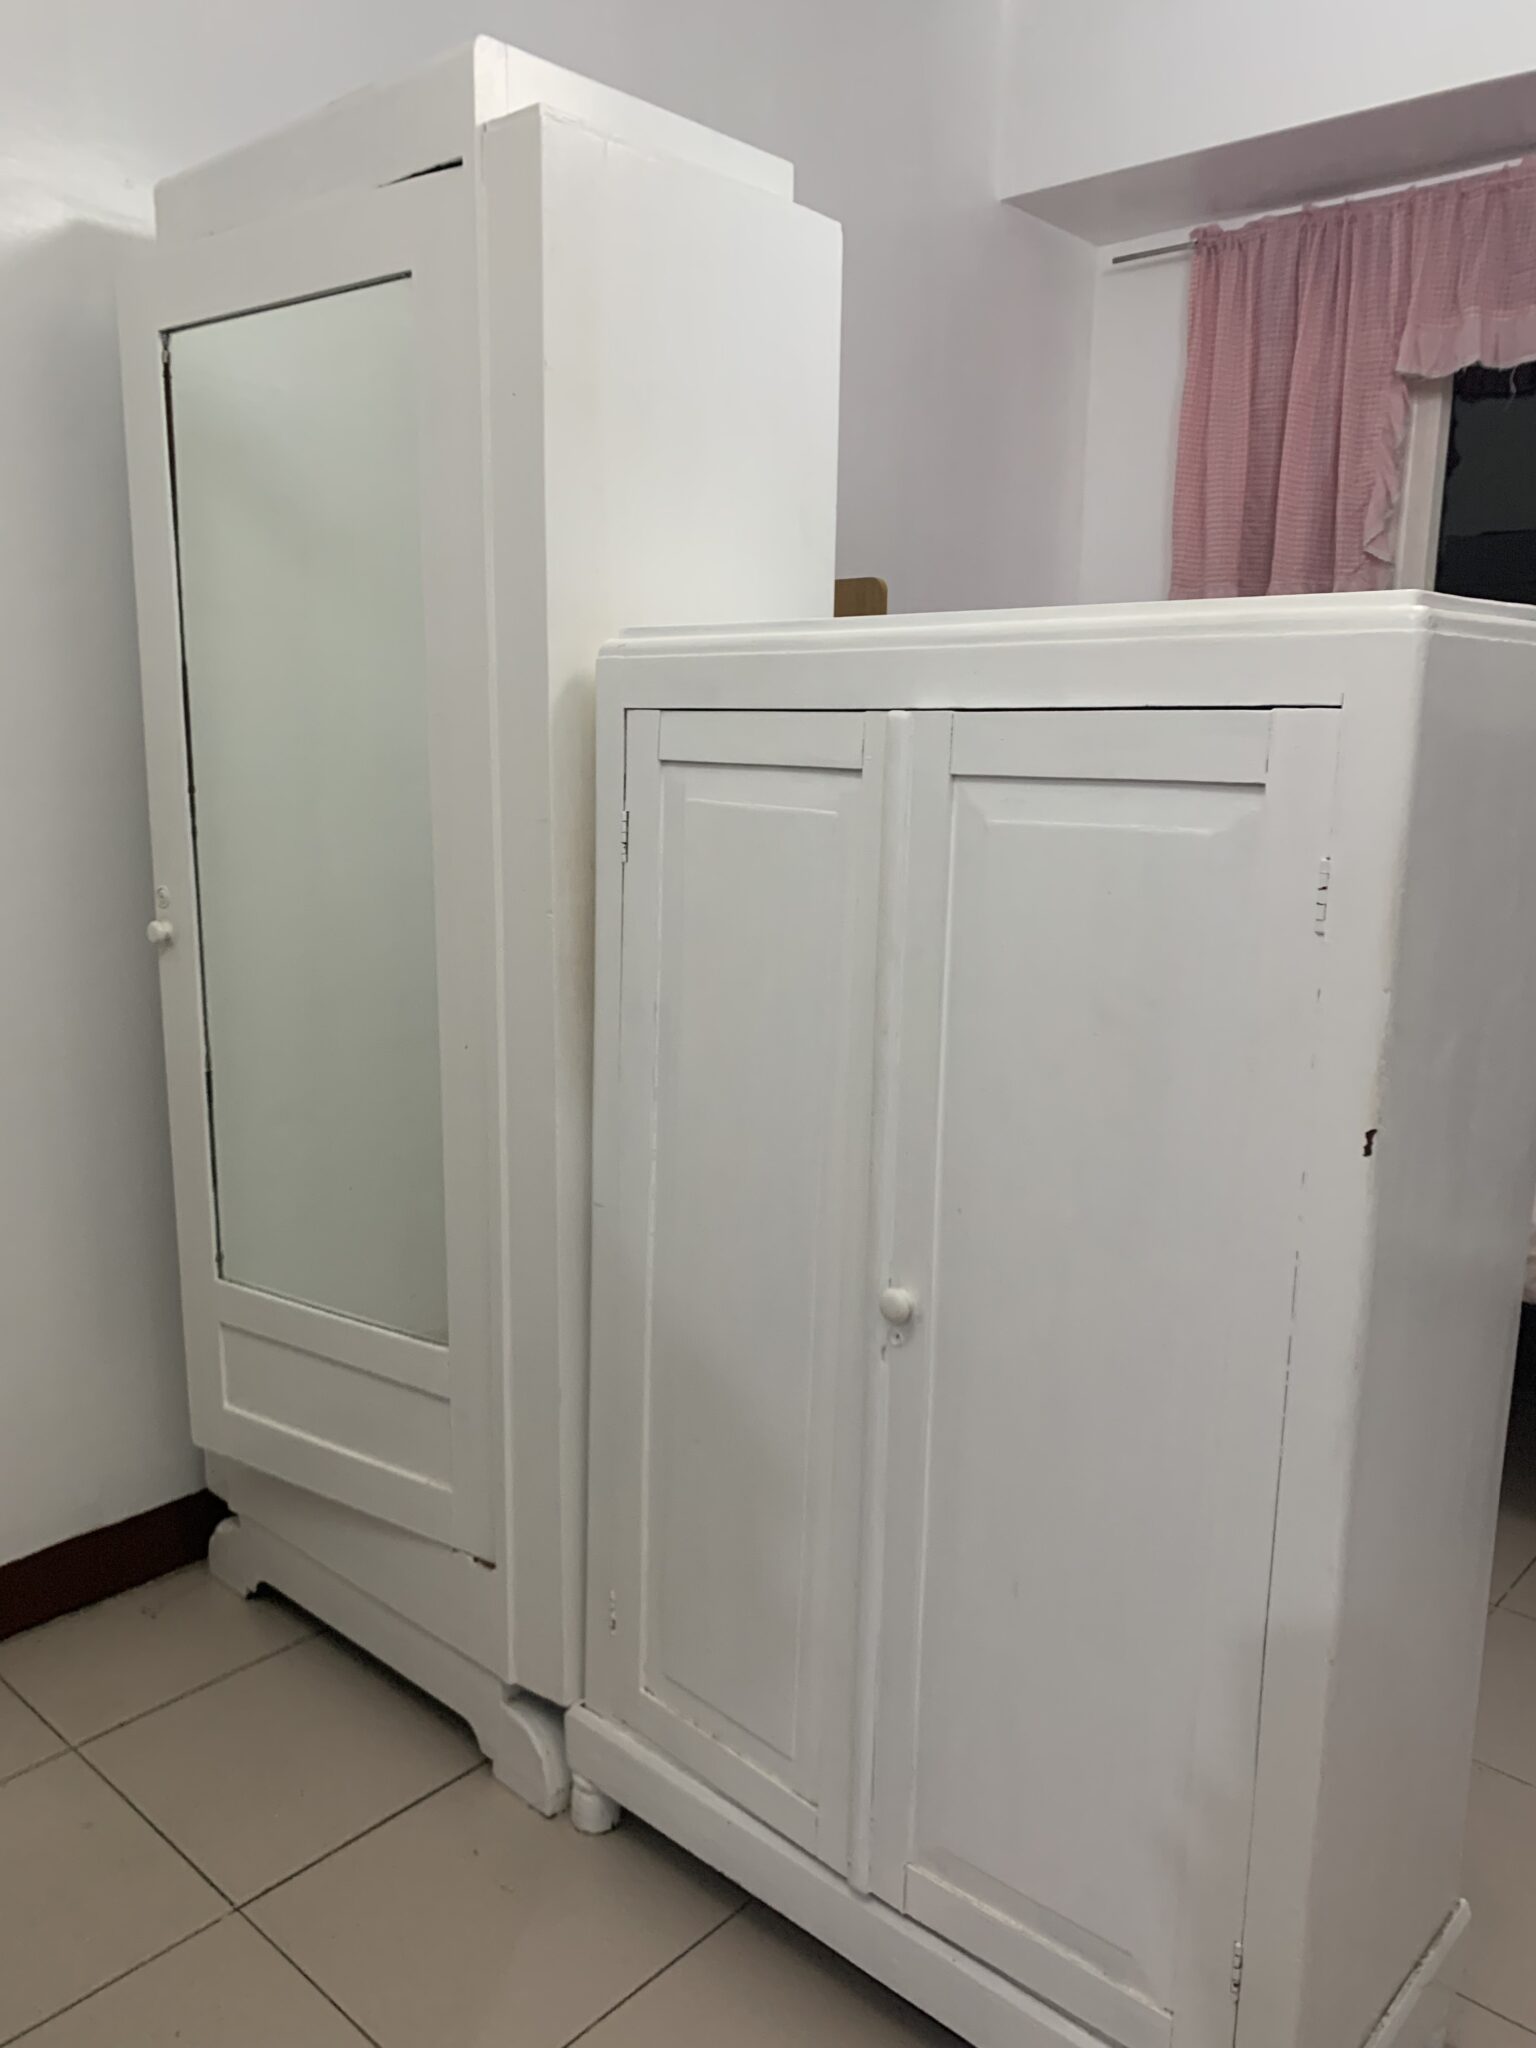 Katipunan Fully-Furnished Studio For Rent near Ateneo, Miriam, CCA, UP Diliman